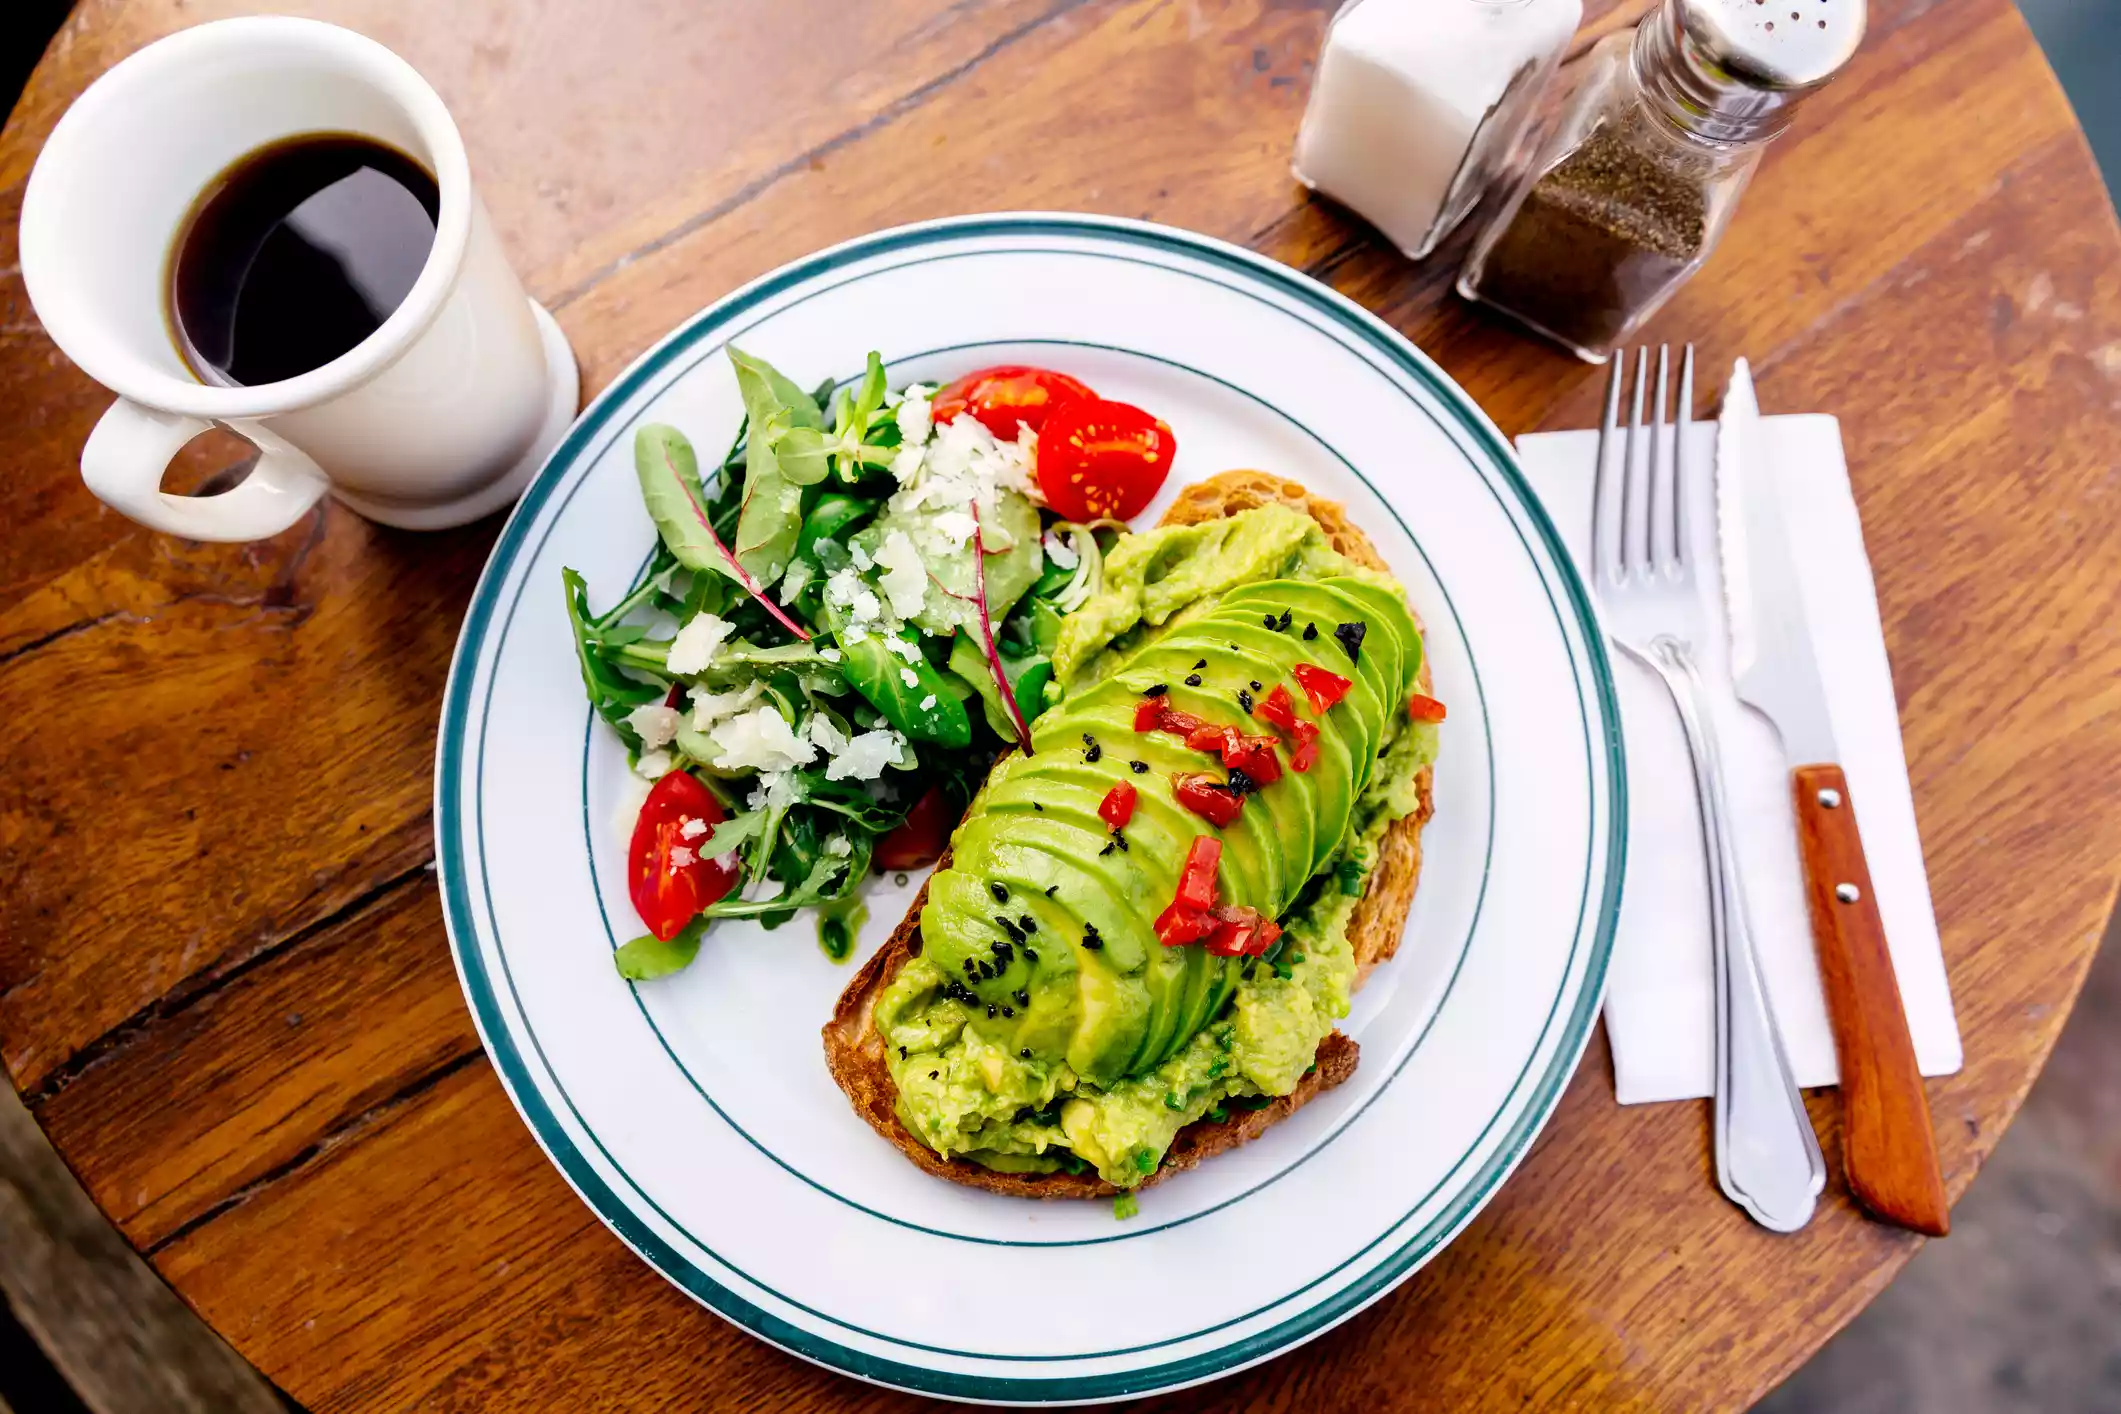 Overhead view of a small, round wood table with a white plate with blue trim filled with a large serving of avocado toast with a green side salad next to a mug of black coffee with salt and pepper shakers and a knife and fork on a napkin 